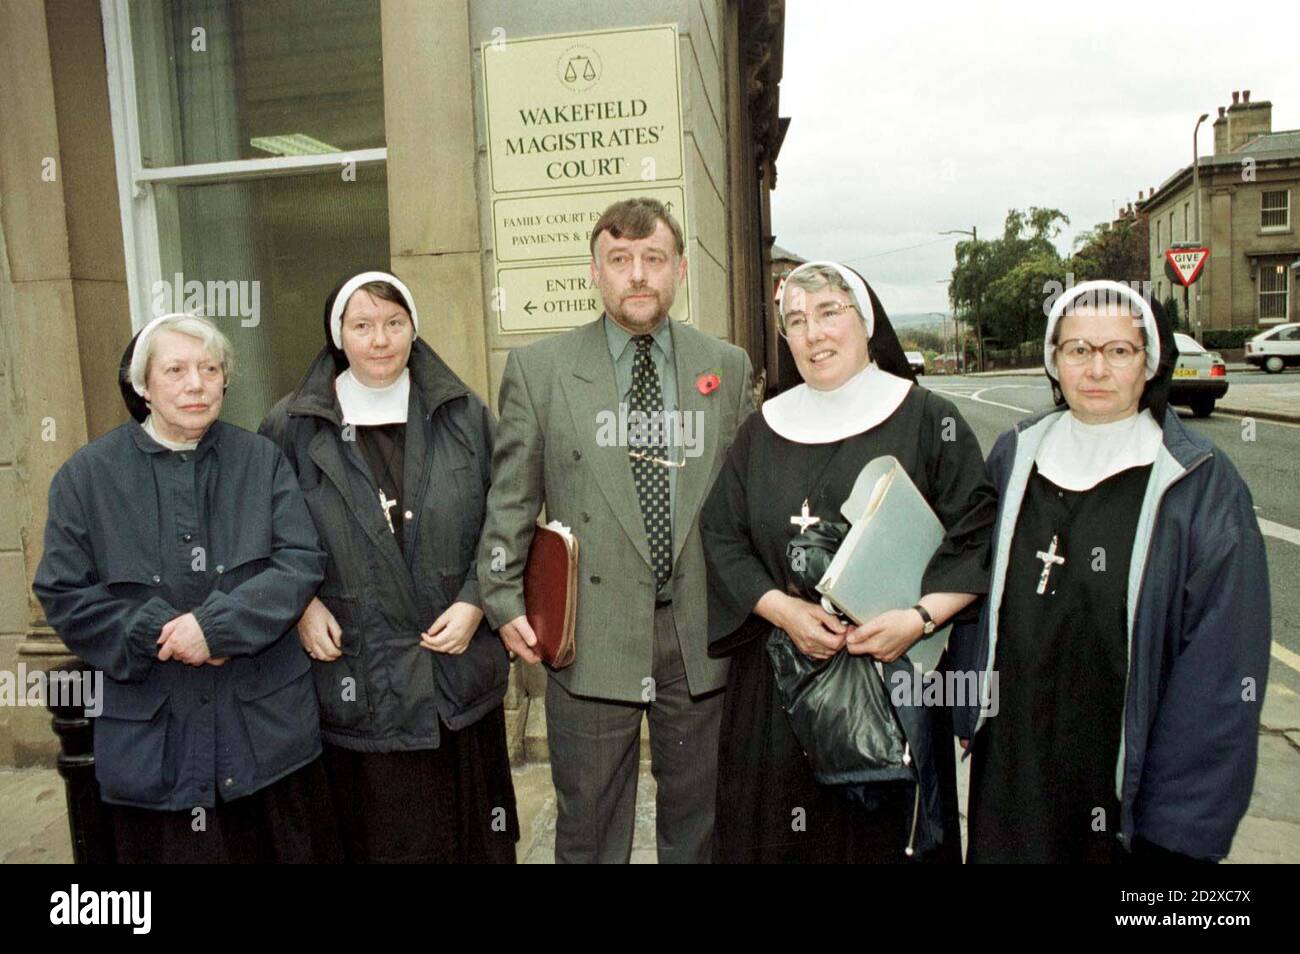 l to r Sister Mary Claire, Sister Gwyneth Mary, M.P. John Hinchcliffe, Mother Rabina and Sister Elizabeth outside Wakefield Magistrates Court where they are trying to prevent the granting of a licence to sell alcohol on the site of their former convent in Horbury, Wakefield, west Yorkshire. The court battle is the latest stage of a war which began after the Sisters of the Community of St Peter sold the dilapidated St Peter's Convent in Horbury, Wakefield, west Yorkshire, to developer John Kirby in 1993. The nuns, who moved into a nearby building, believed the convent would be used by a Stock Photo